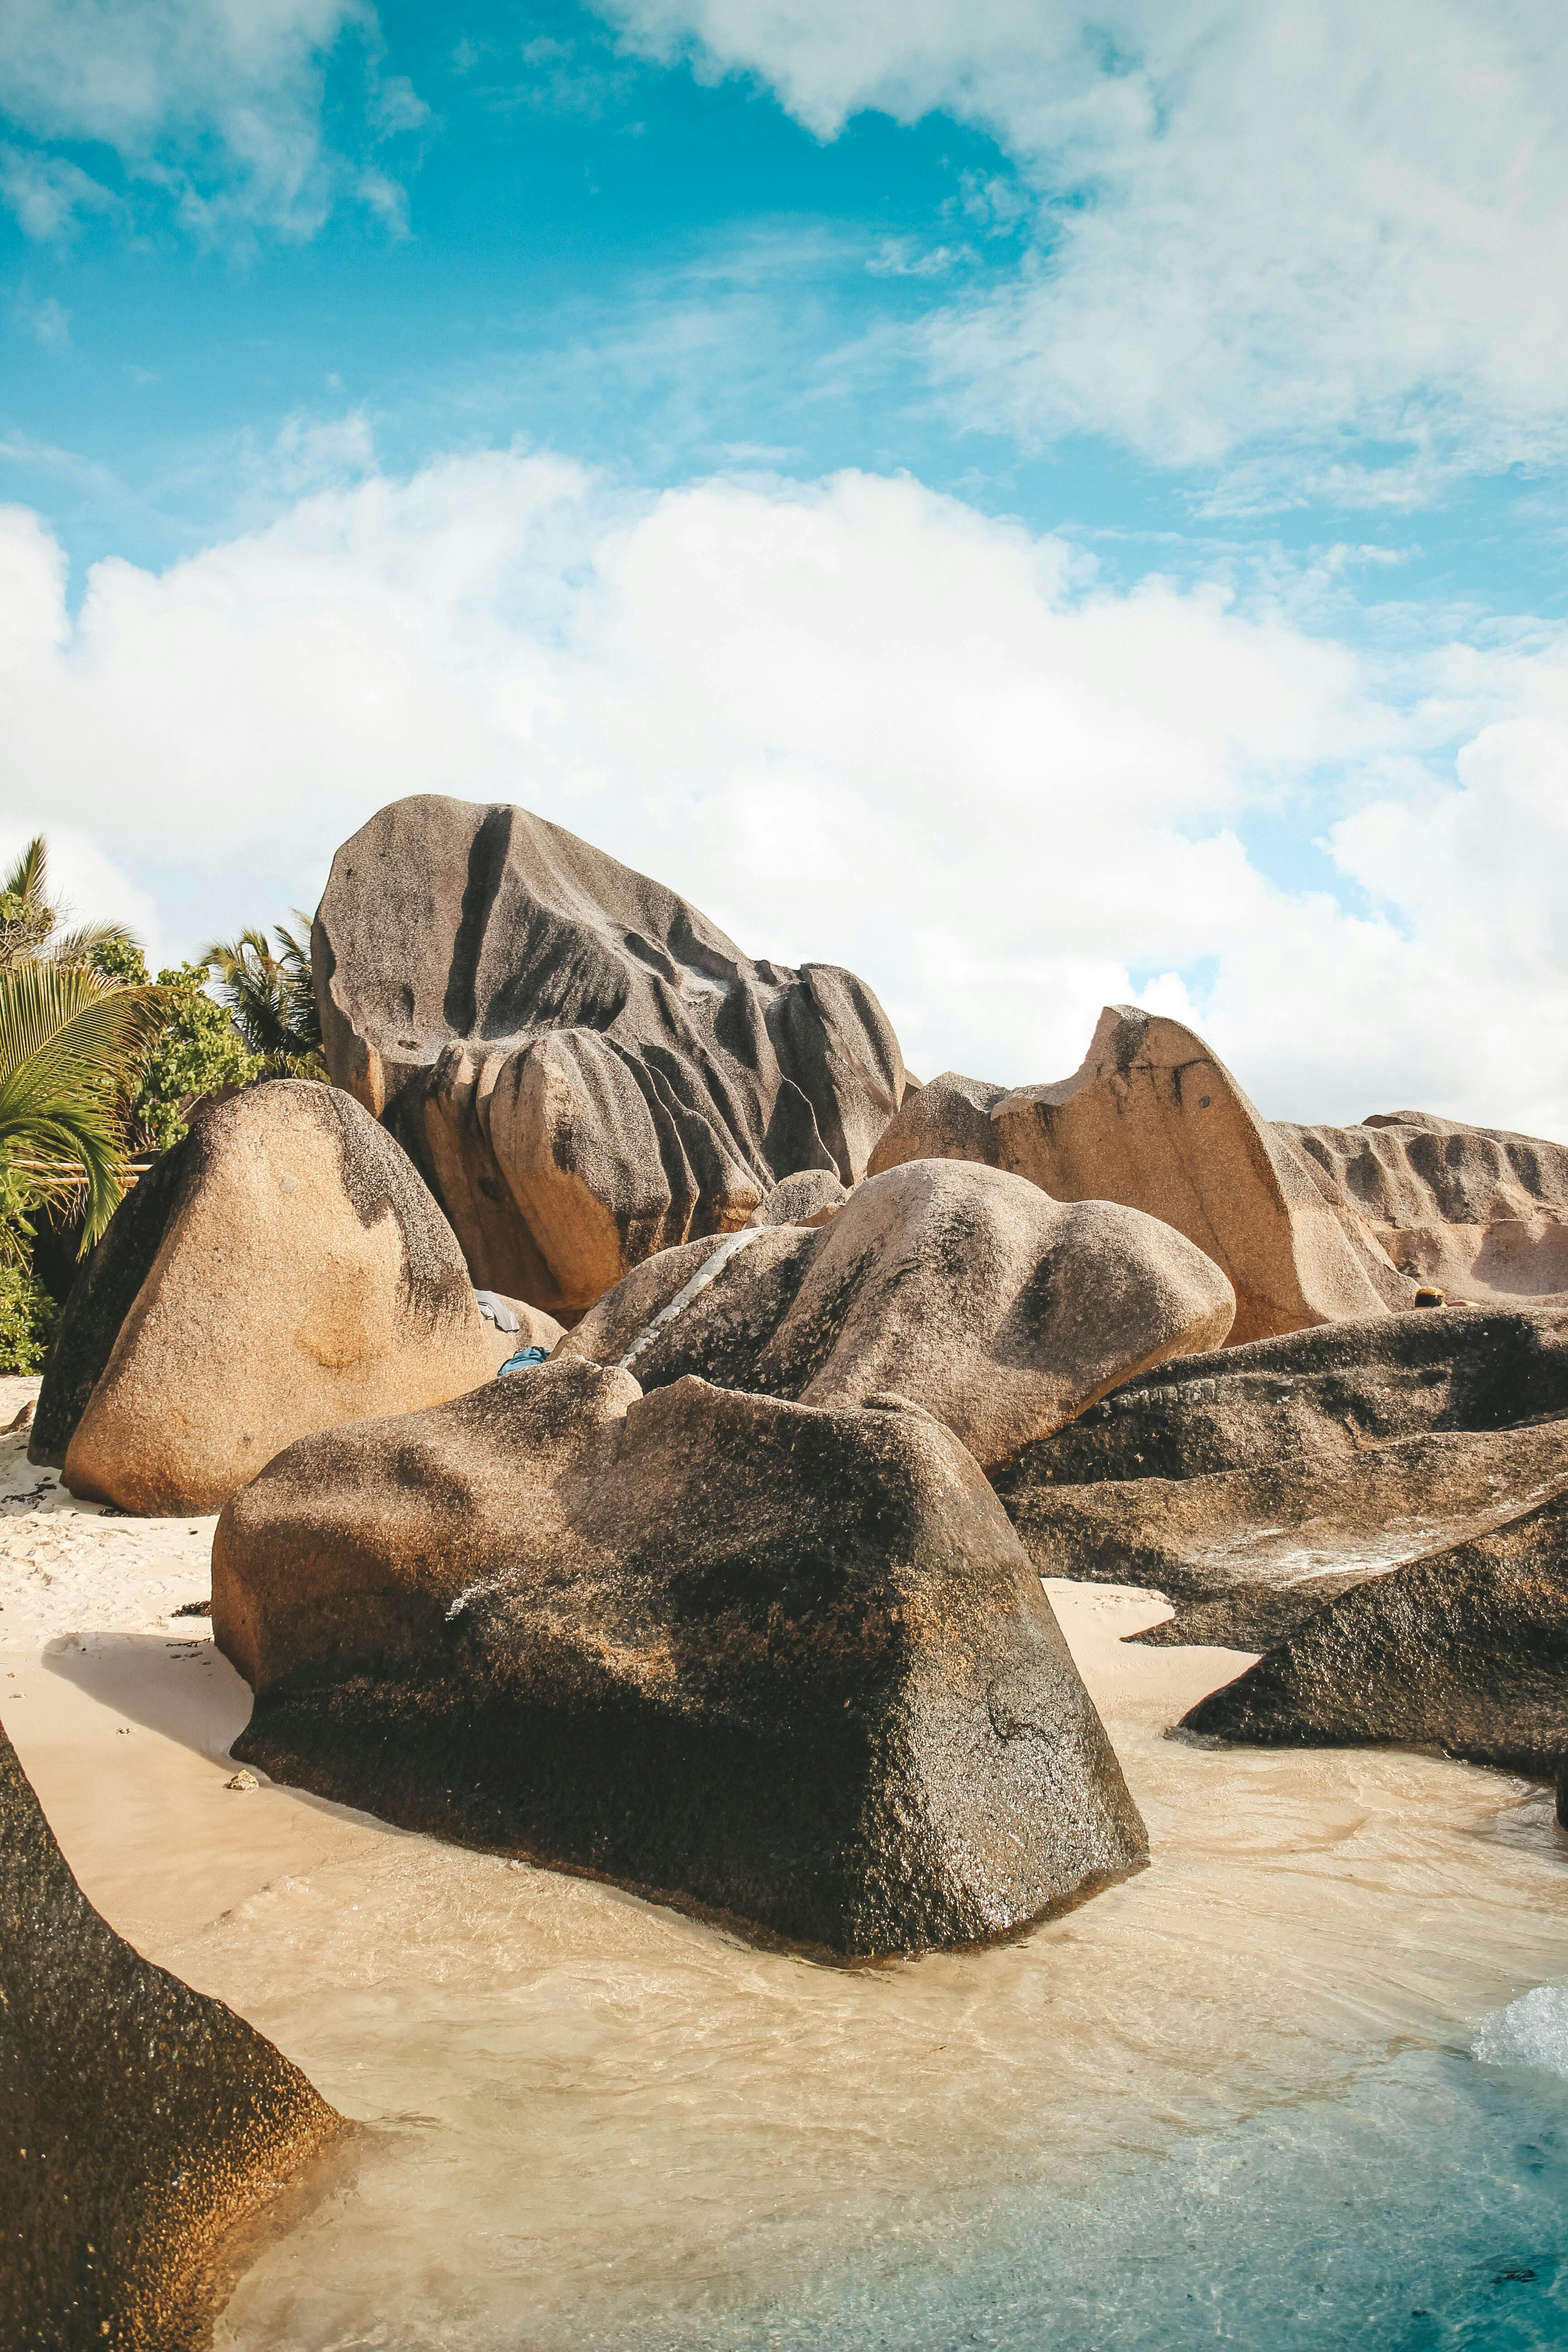 Best places to visit in Seychelles